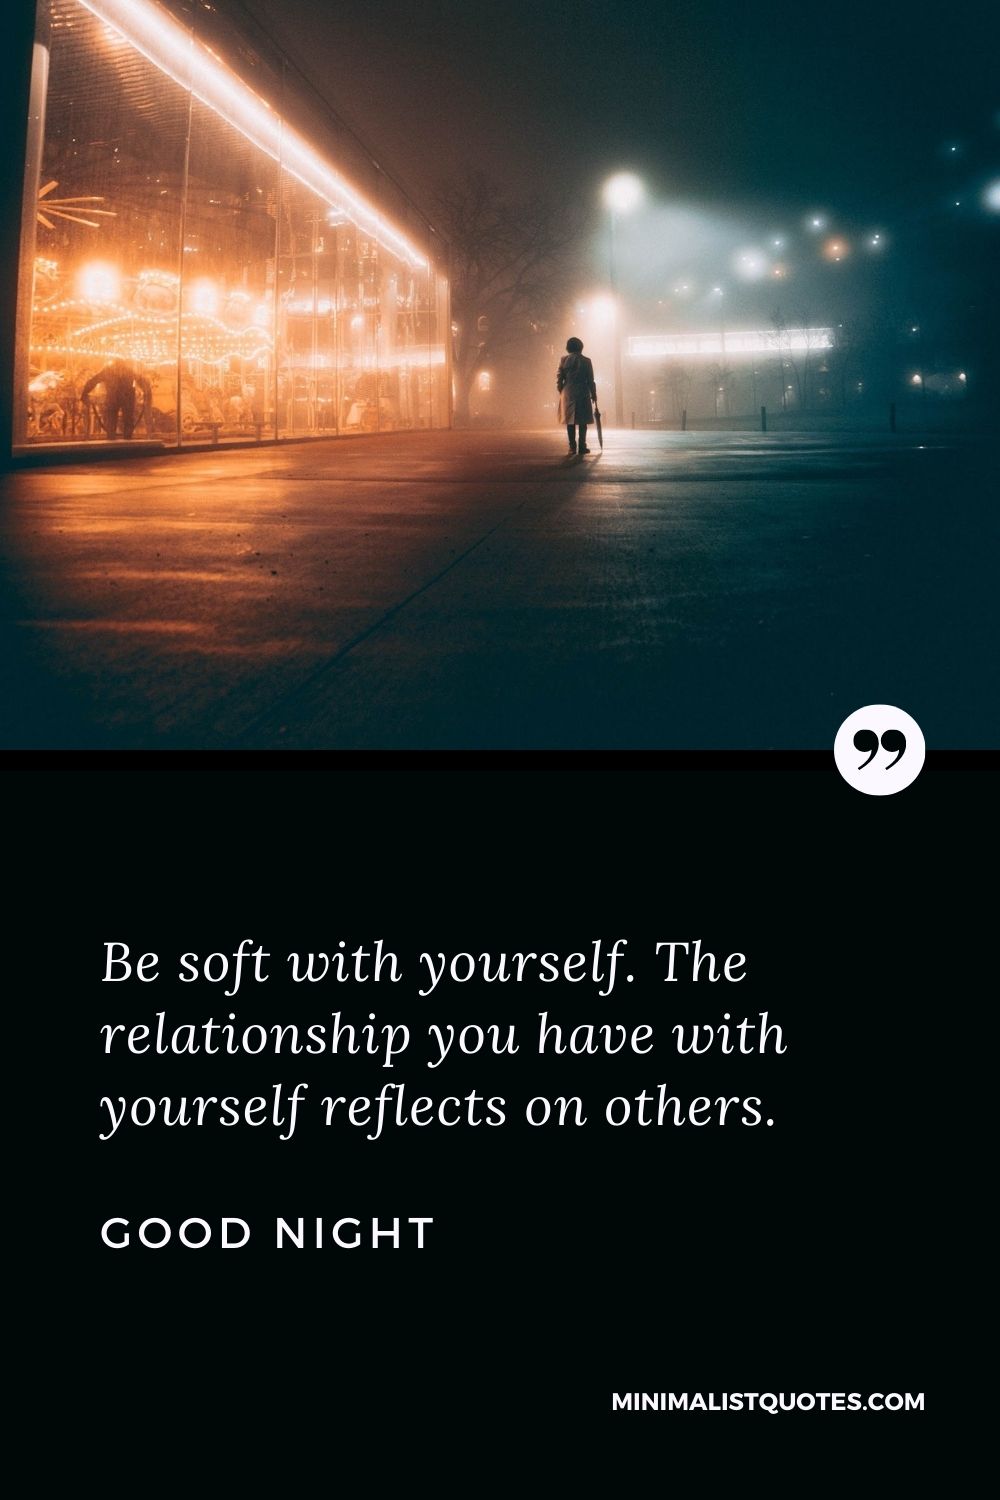 Good Night Wishes - Be soft with yourself. The relationship you have with yourself reflects on others.